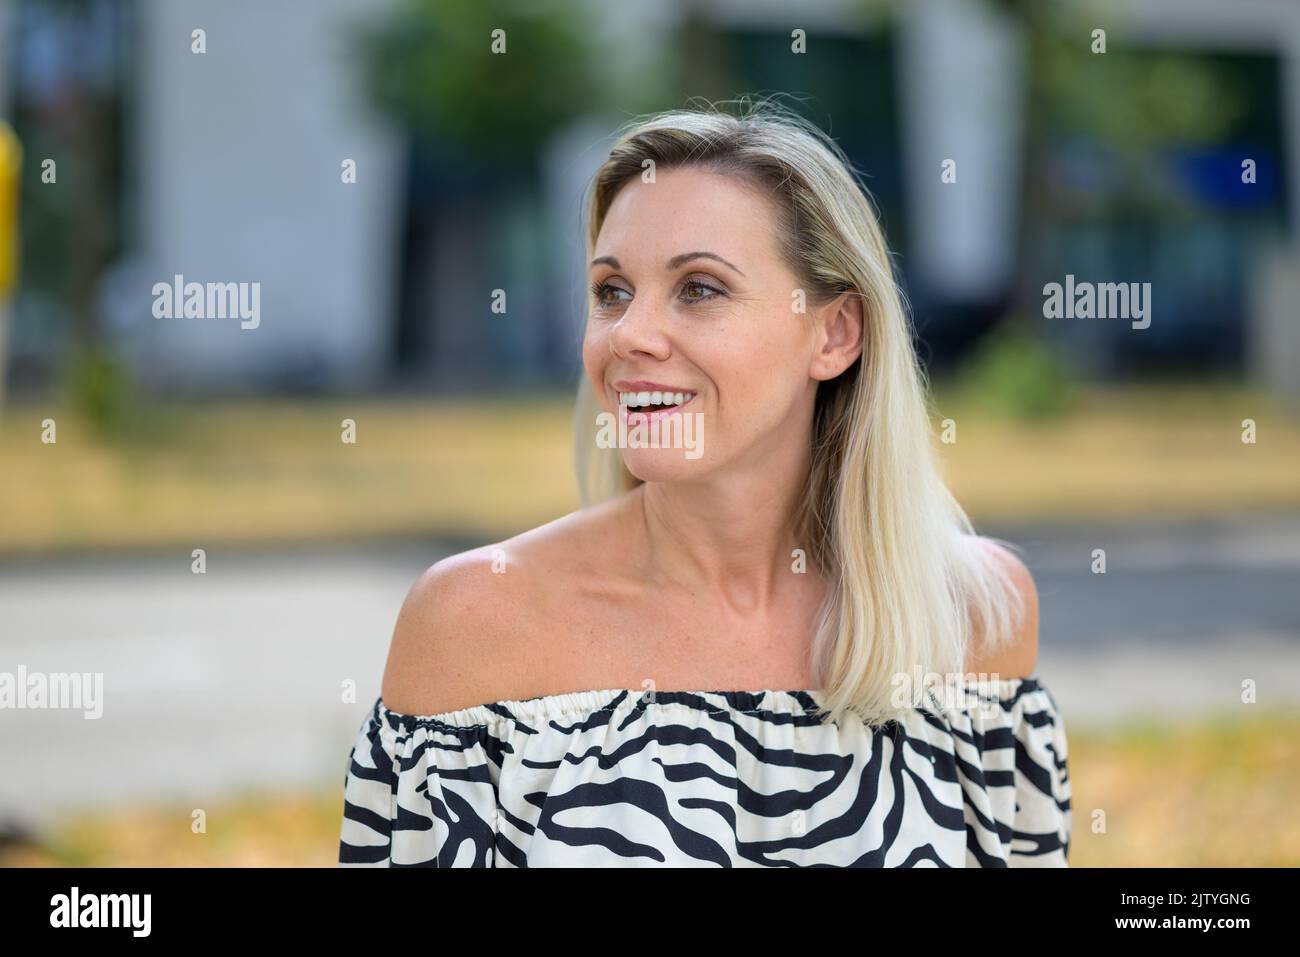 Happy vivacious woman with a lovely warm smile looking round with an expression of delight Stock Photo